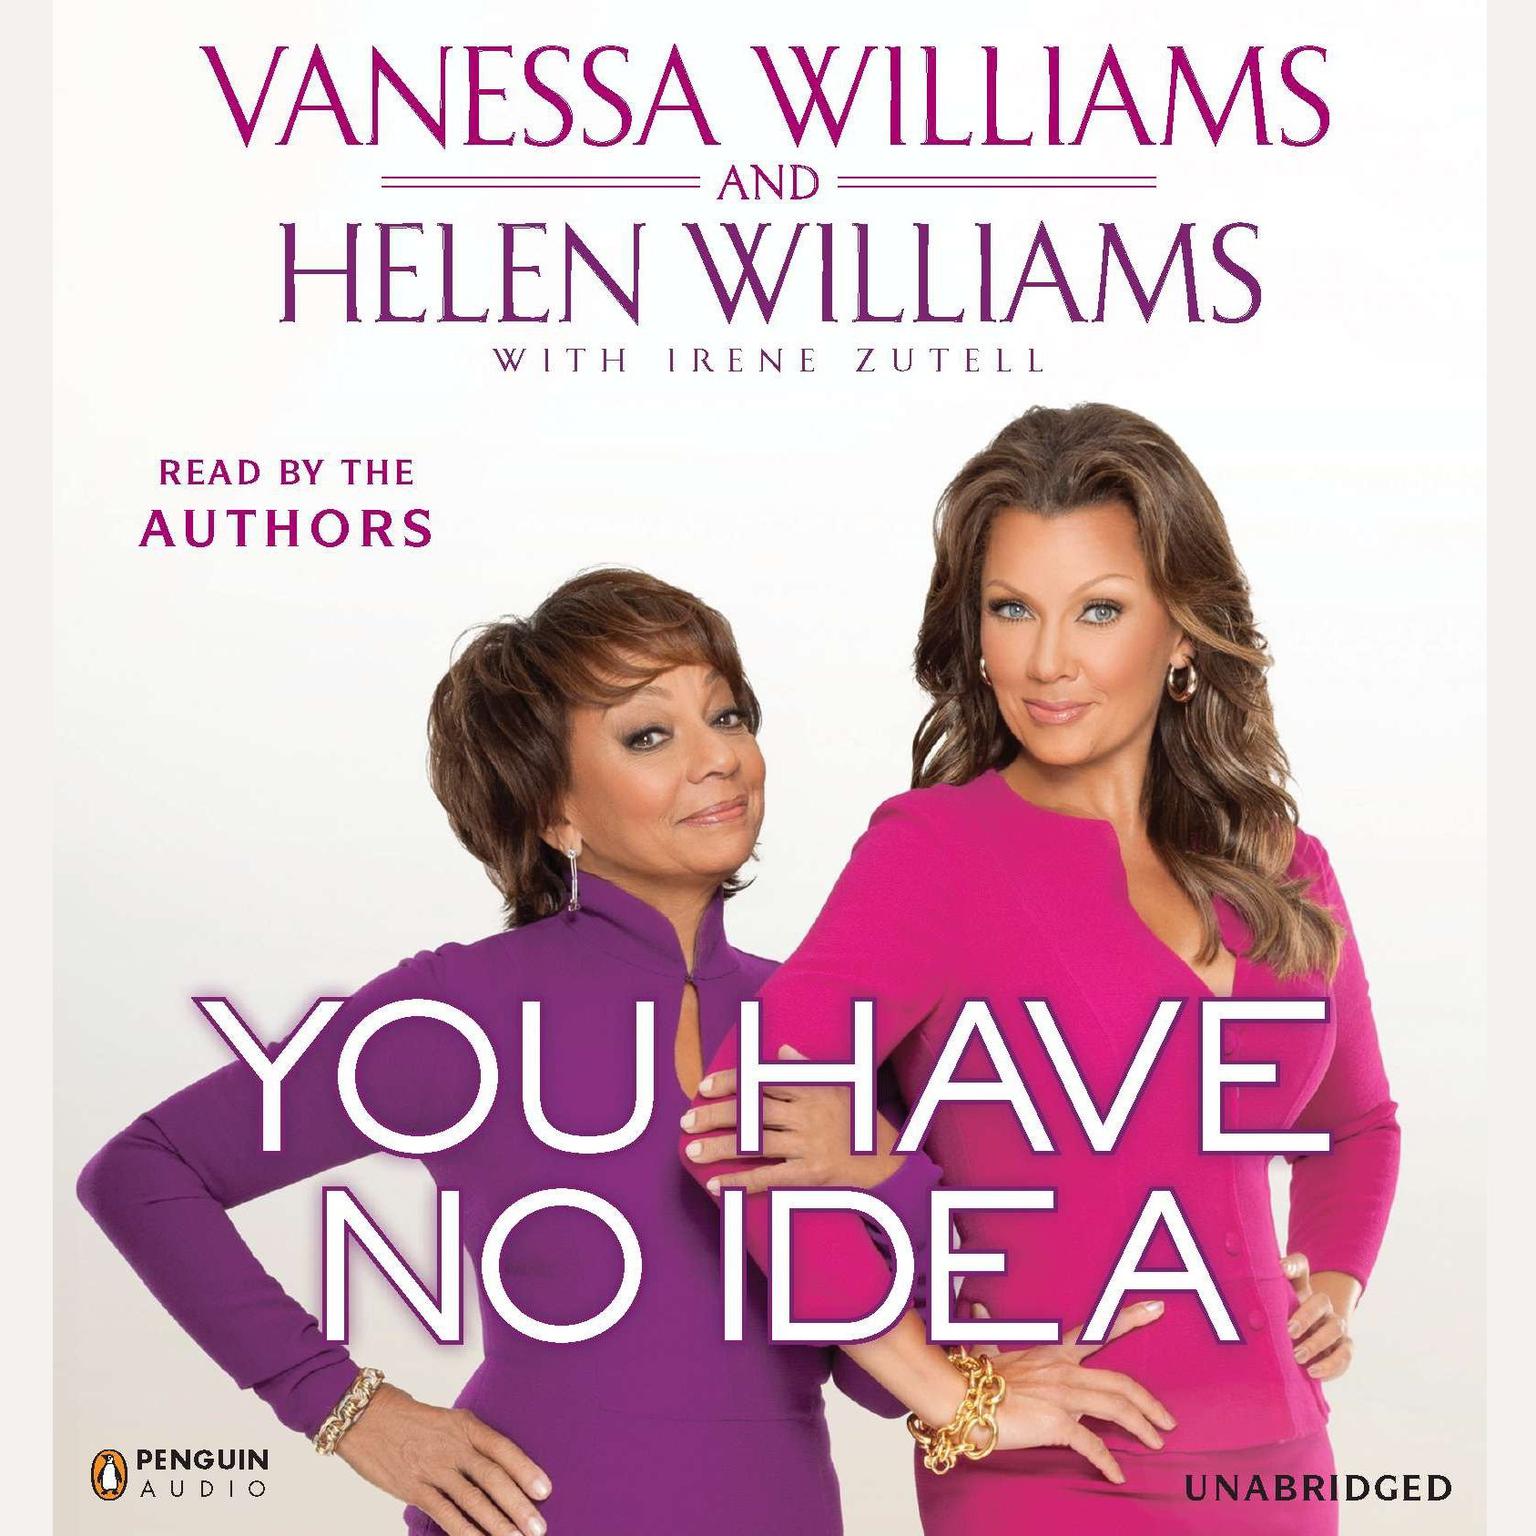 You Have No Idea: A Famous Daughter, Her No-nonsense Mother, and How They Survived Pageants, Holly wood, Love, Loss (and Each Other) Audiobook, by Vanessa Williams